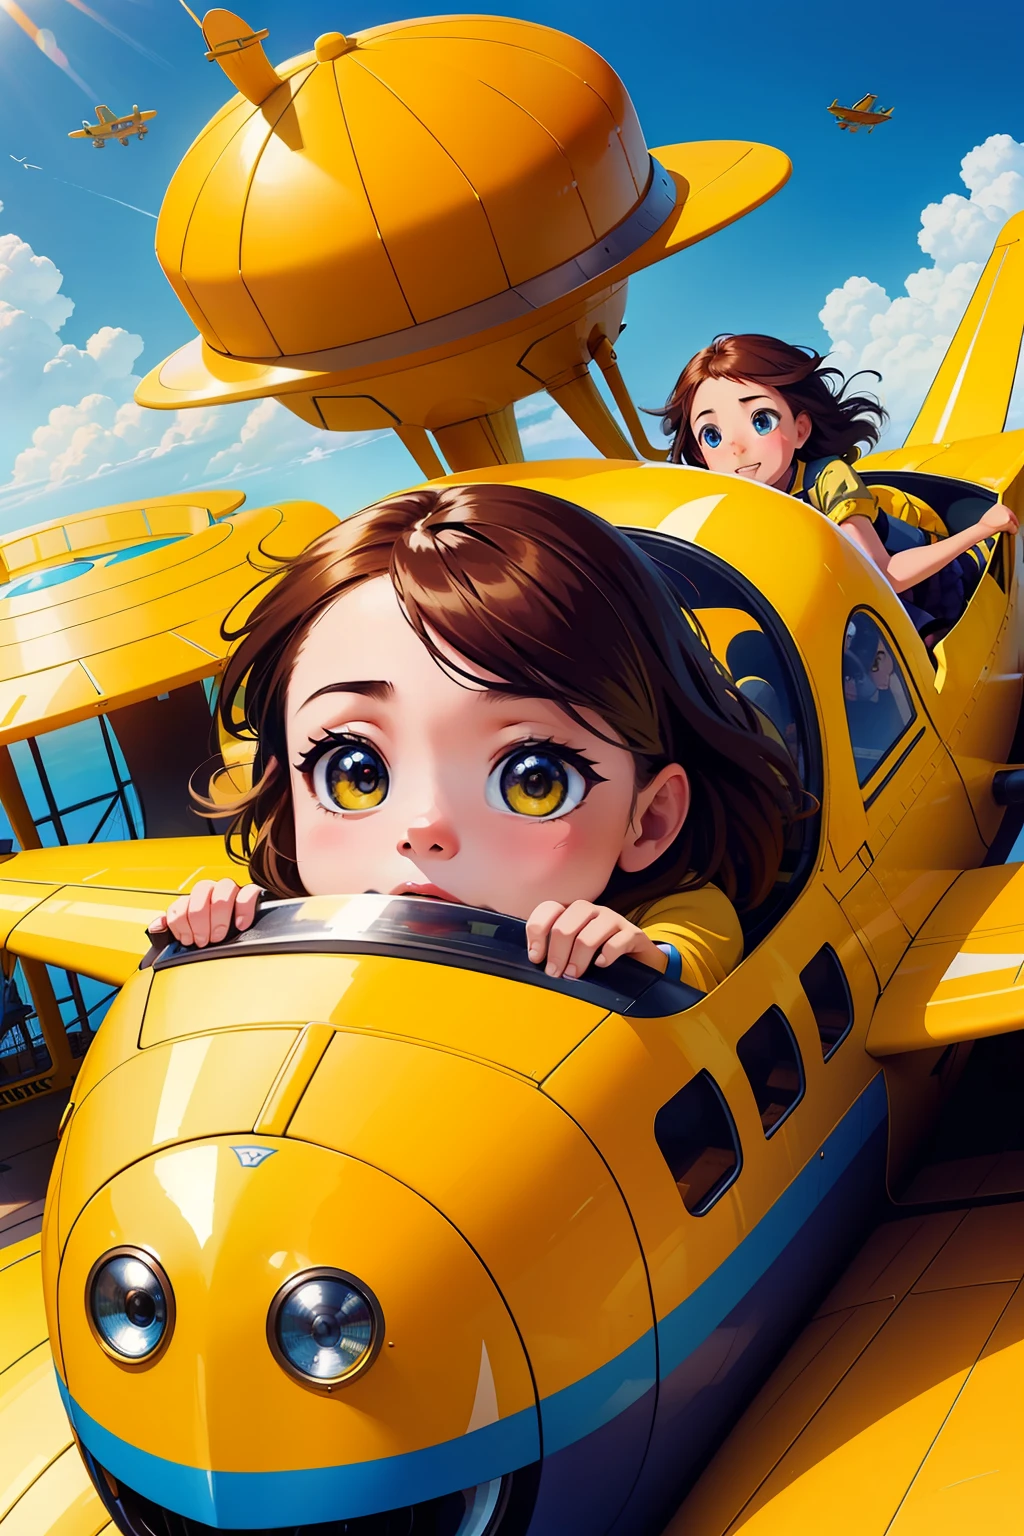 there are two girls cute face riding on a yellow plane in the sky, children's, , flying vehicles, children, flying machinery, amusement park attractions, planes, shutterstock, advertising photo, midair, overhead, close-up photo, close - up photo